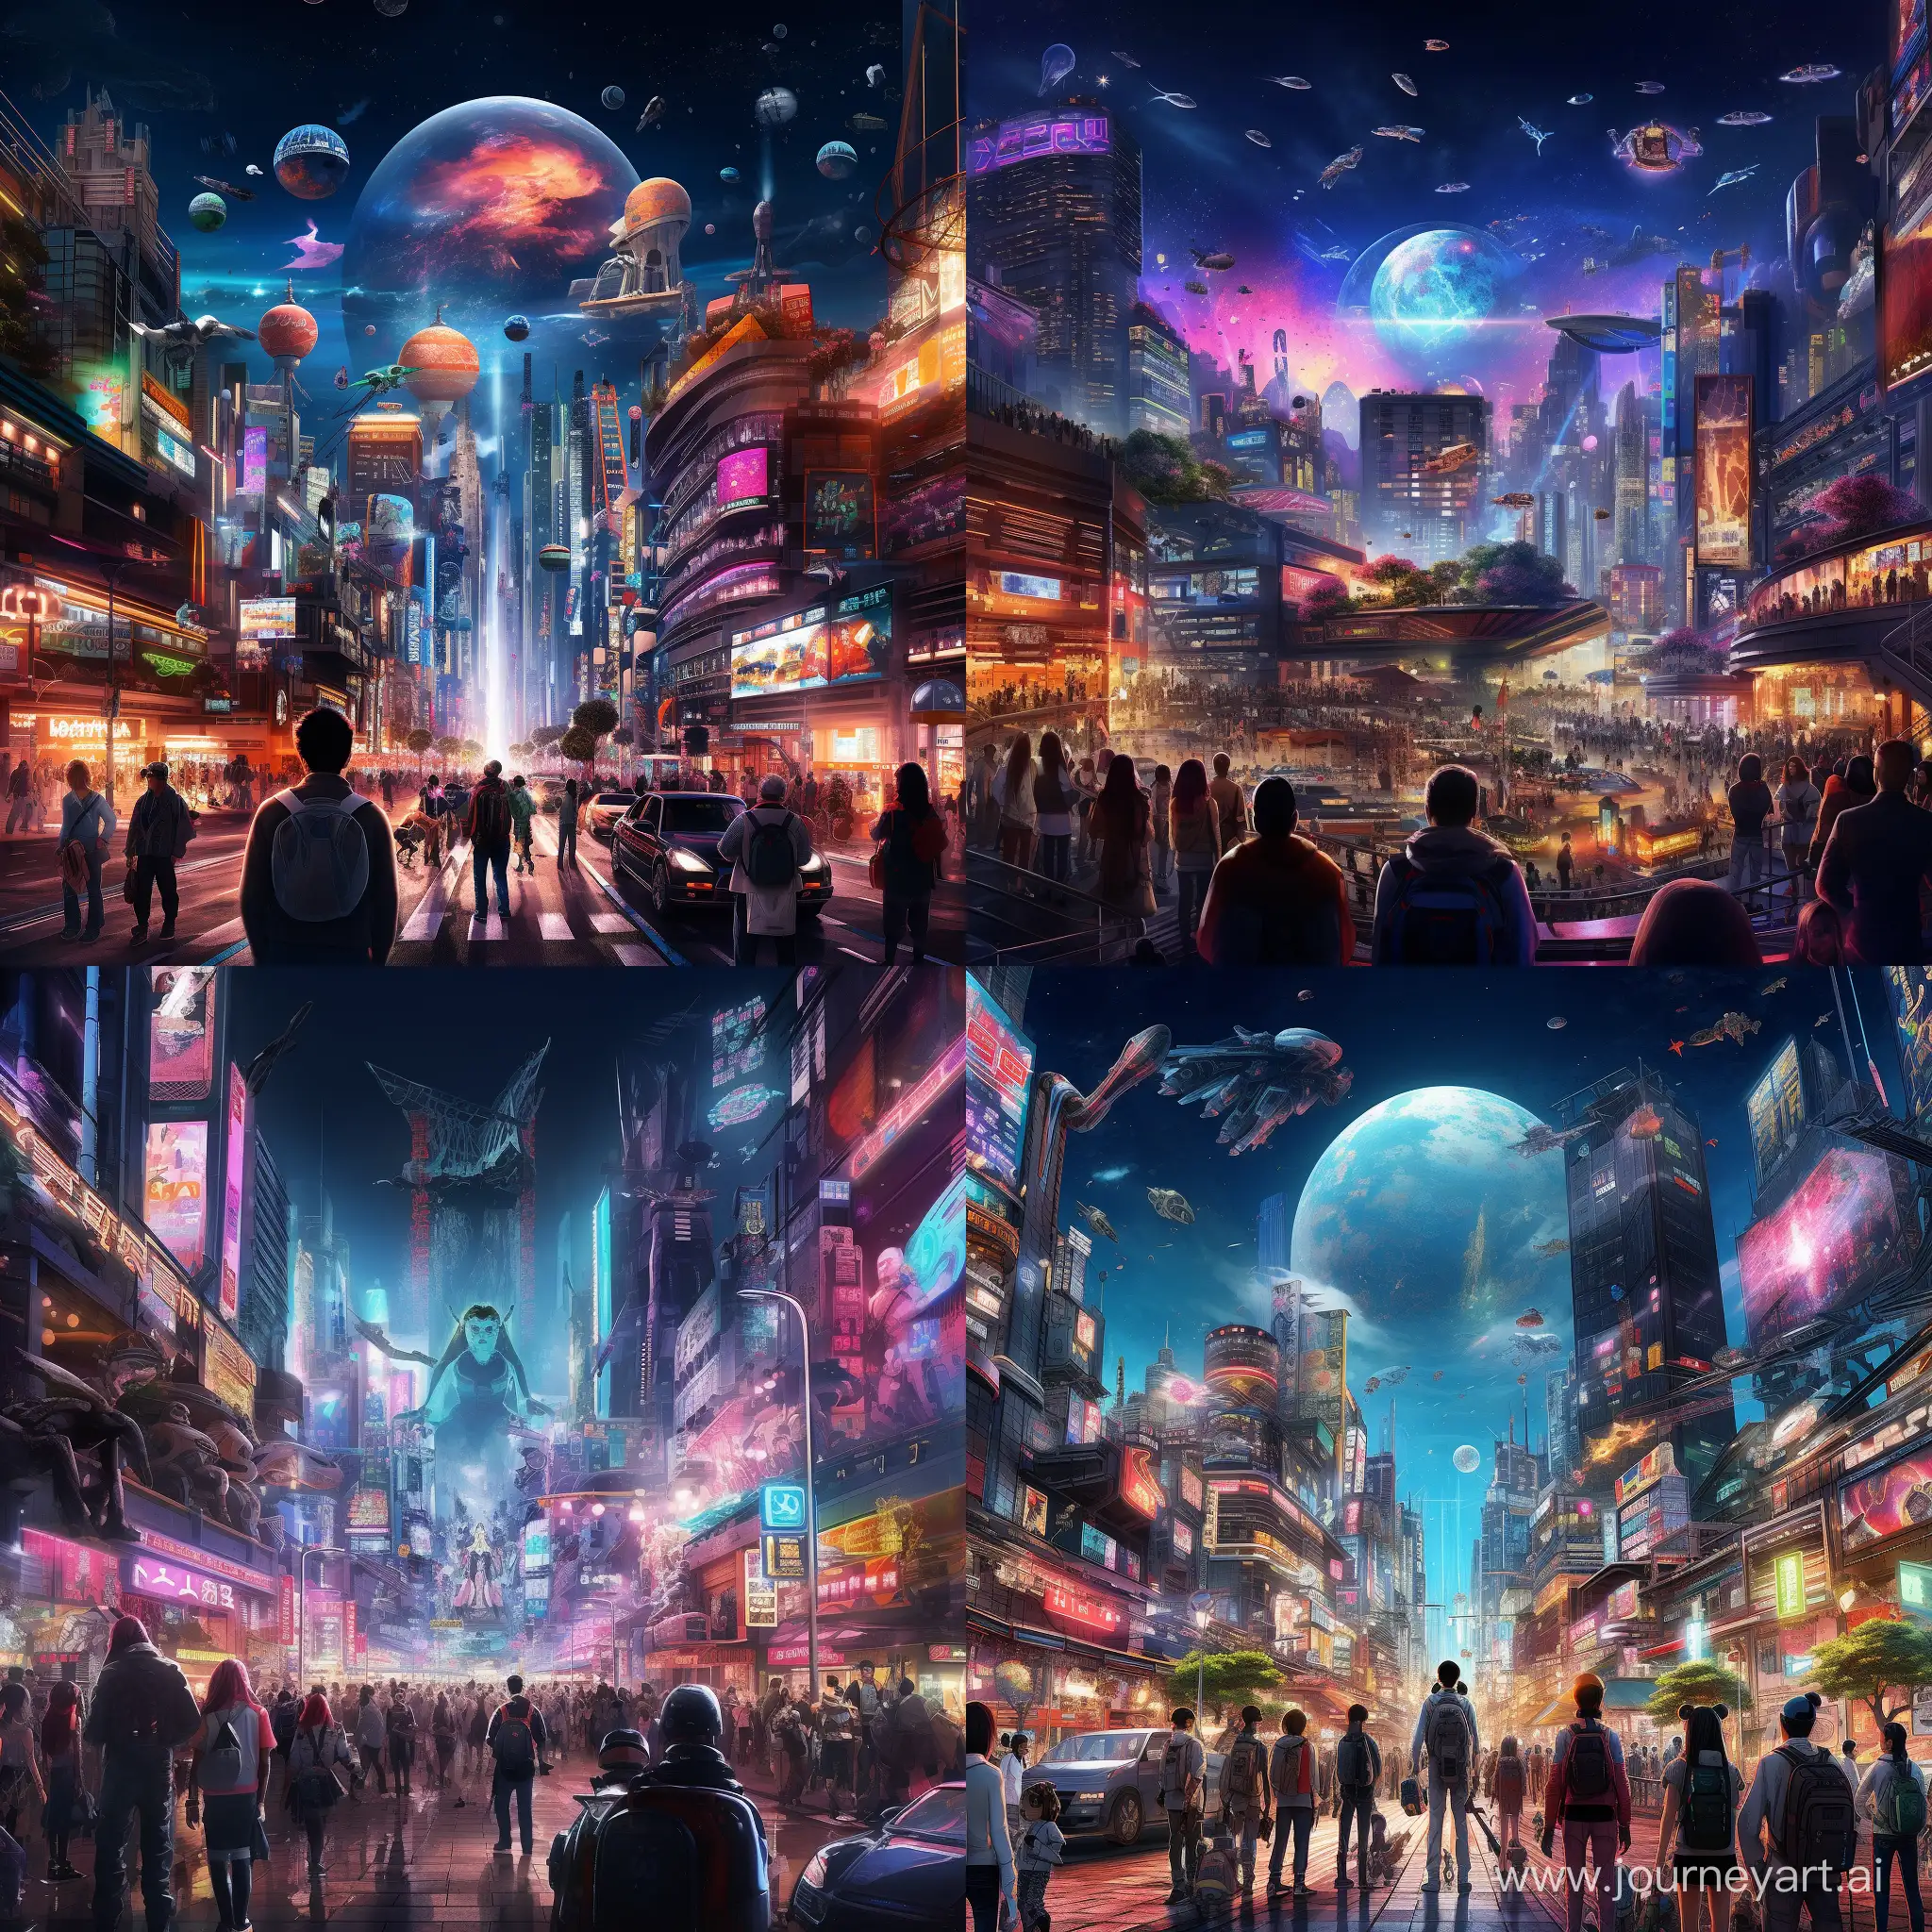 Vibrant-Cyberpunk-Cityscape-at-Night-with-Neonlit-Skyscrapers-and-Diverse-Crowd